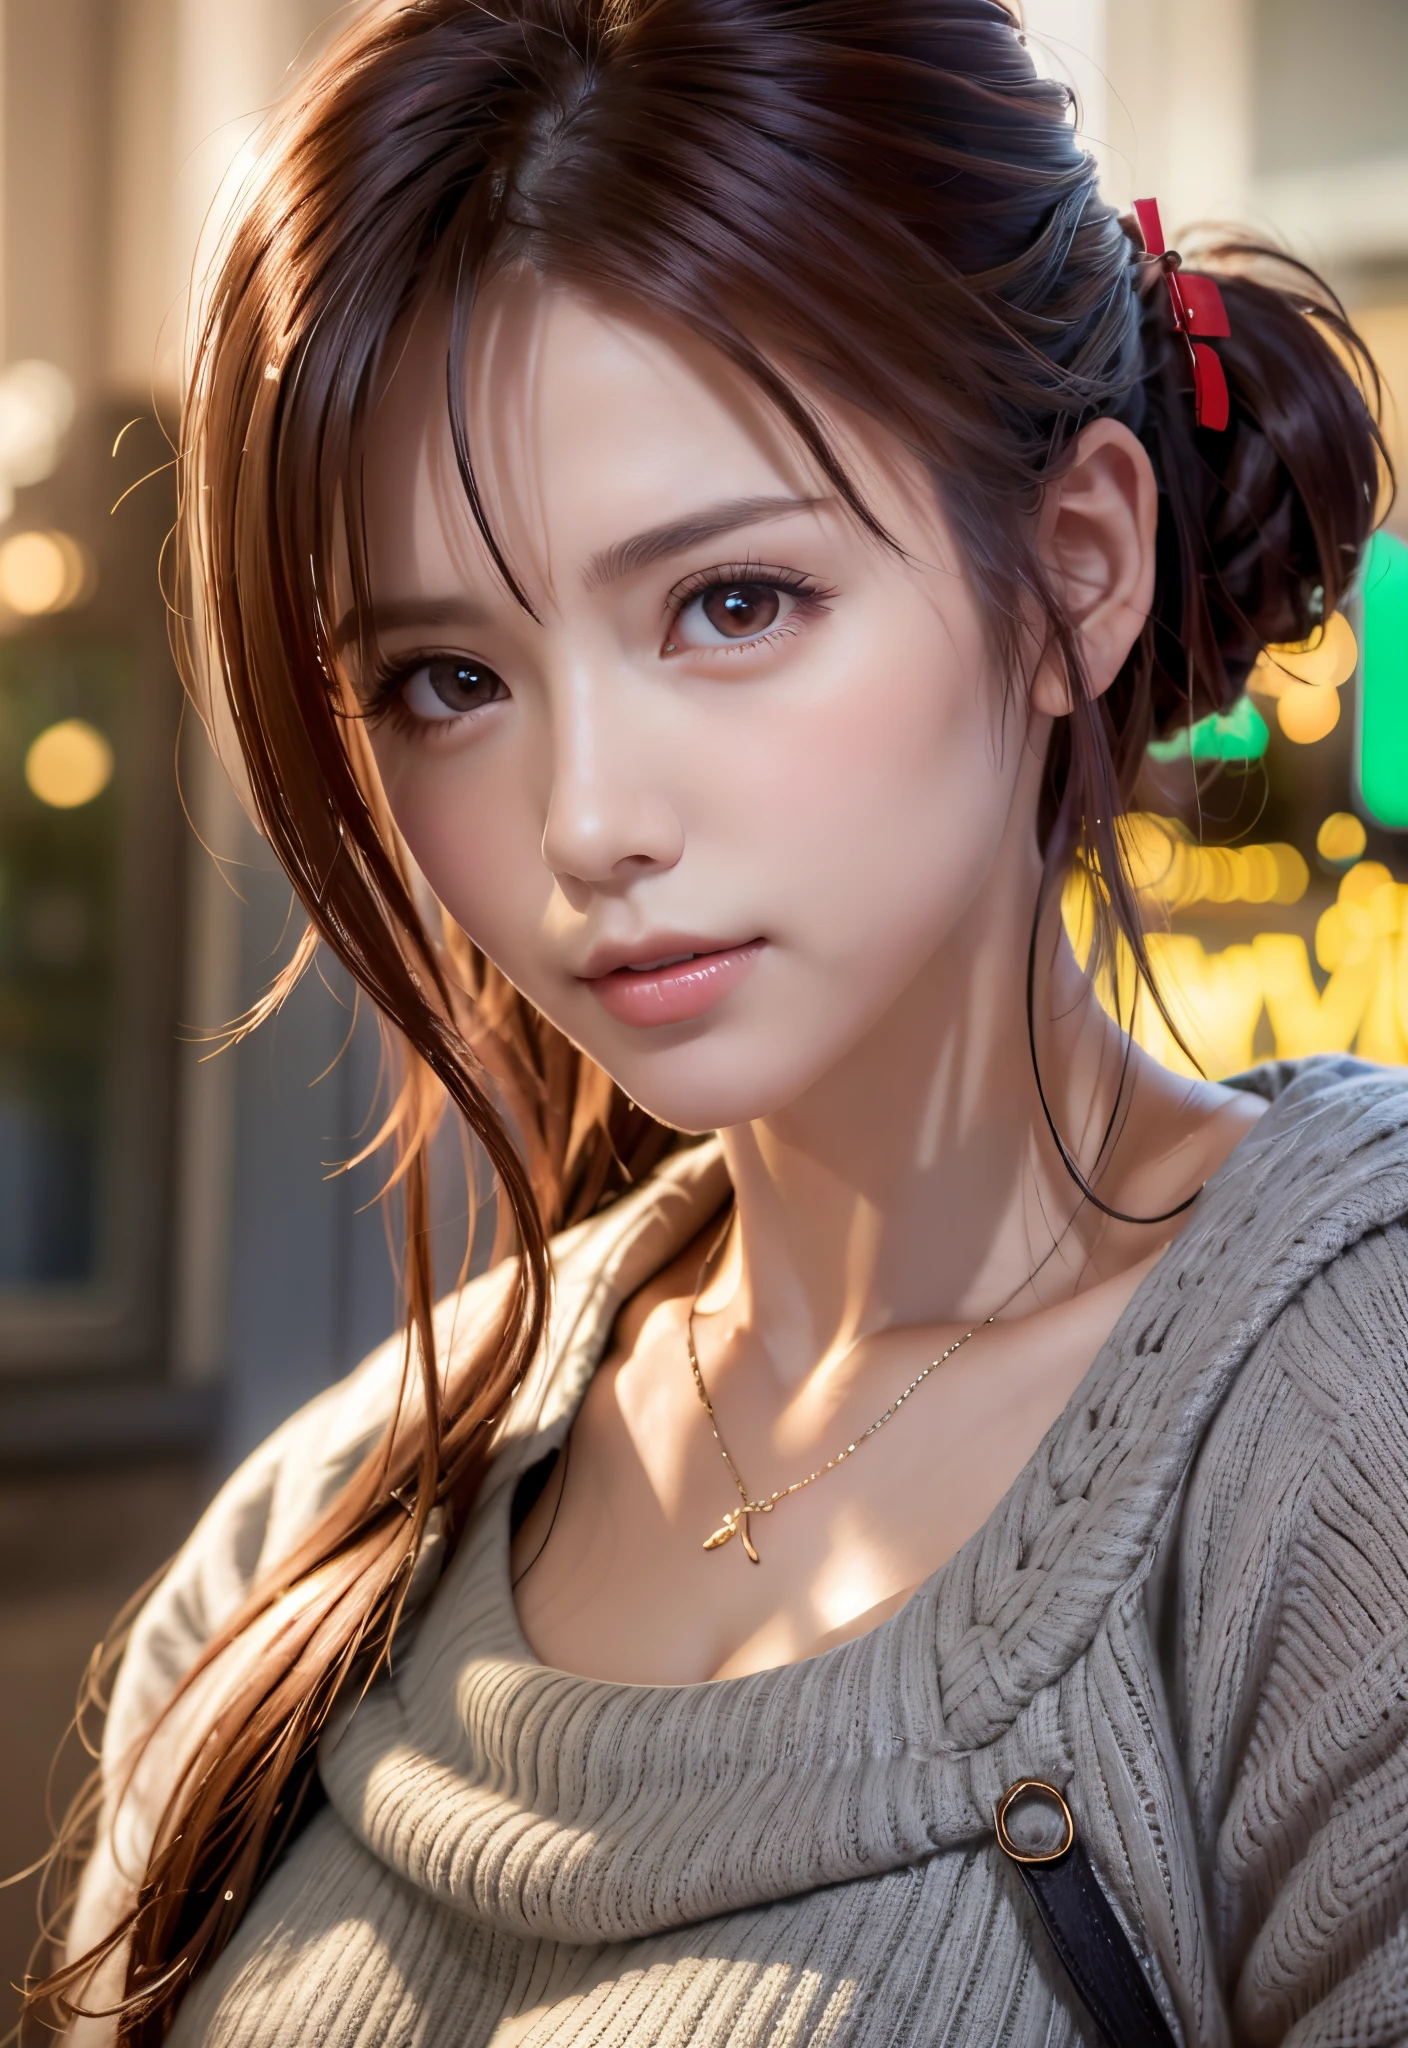 8K, of the highest quality, masutepiece:1.2), (Realistic, Photorealsitic:1.37), of the highest quality, masutepiece, Beautiful young woman, Pensive expression,、A charming、and an inviting look, Oversized knitwear、cleavage of the breast, Hair tied back, Cinematic background, Light skin tone